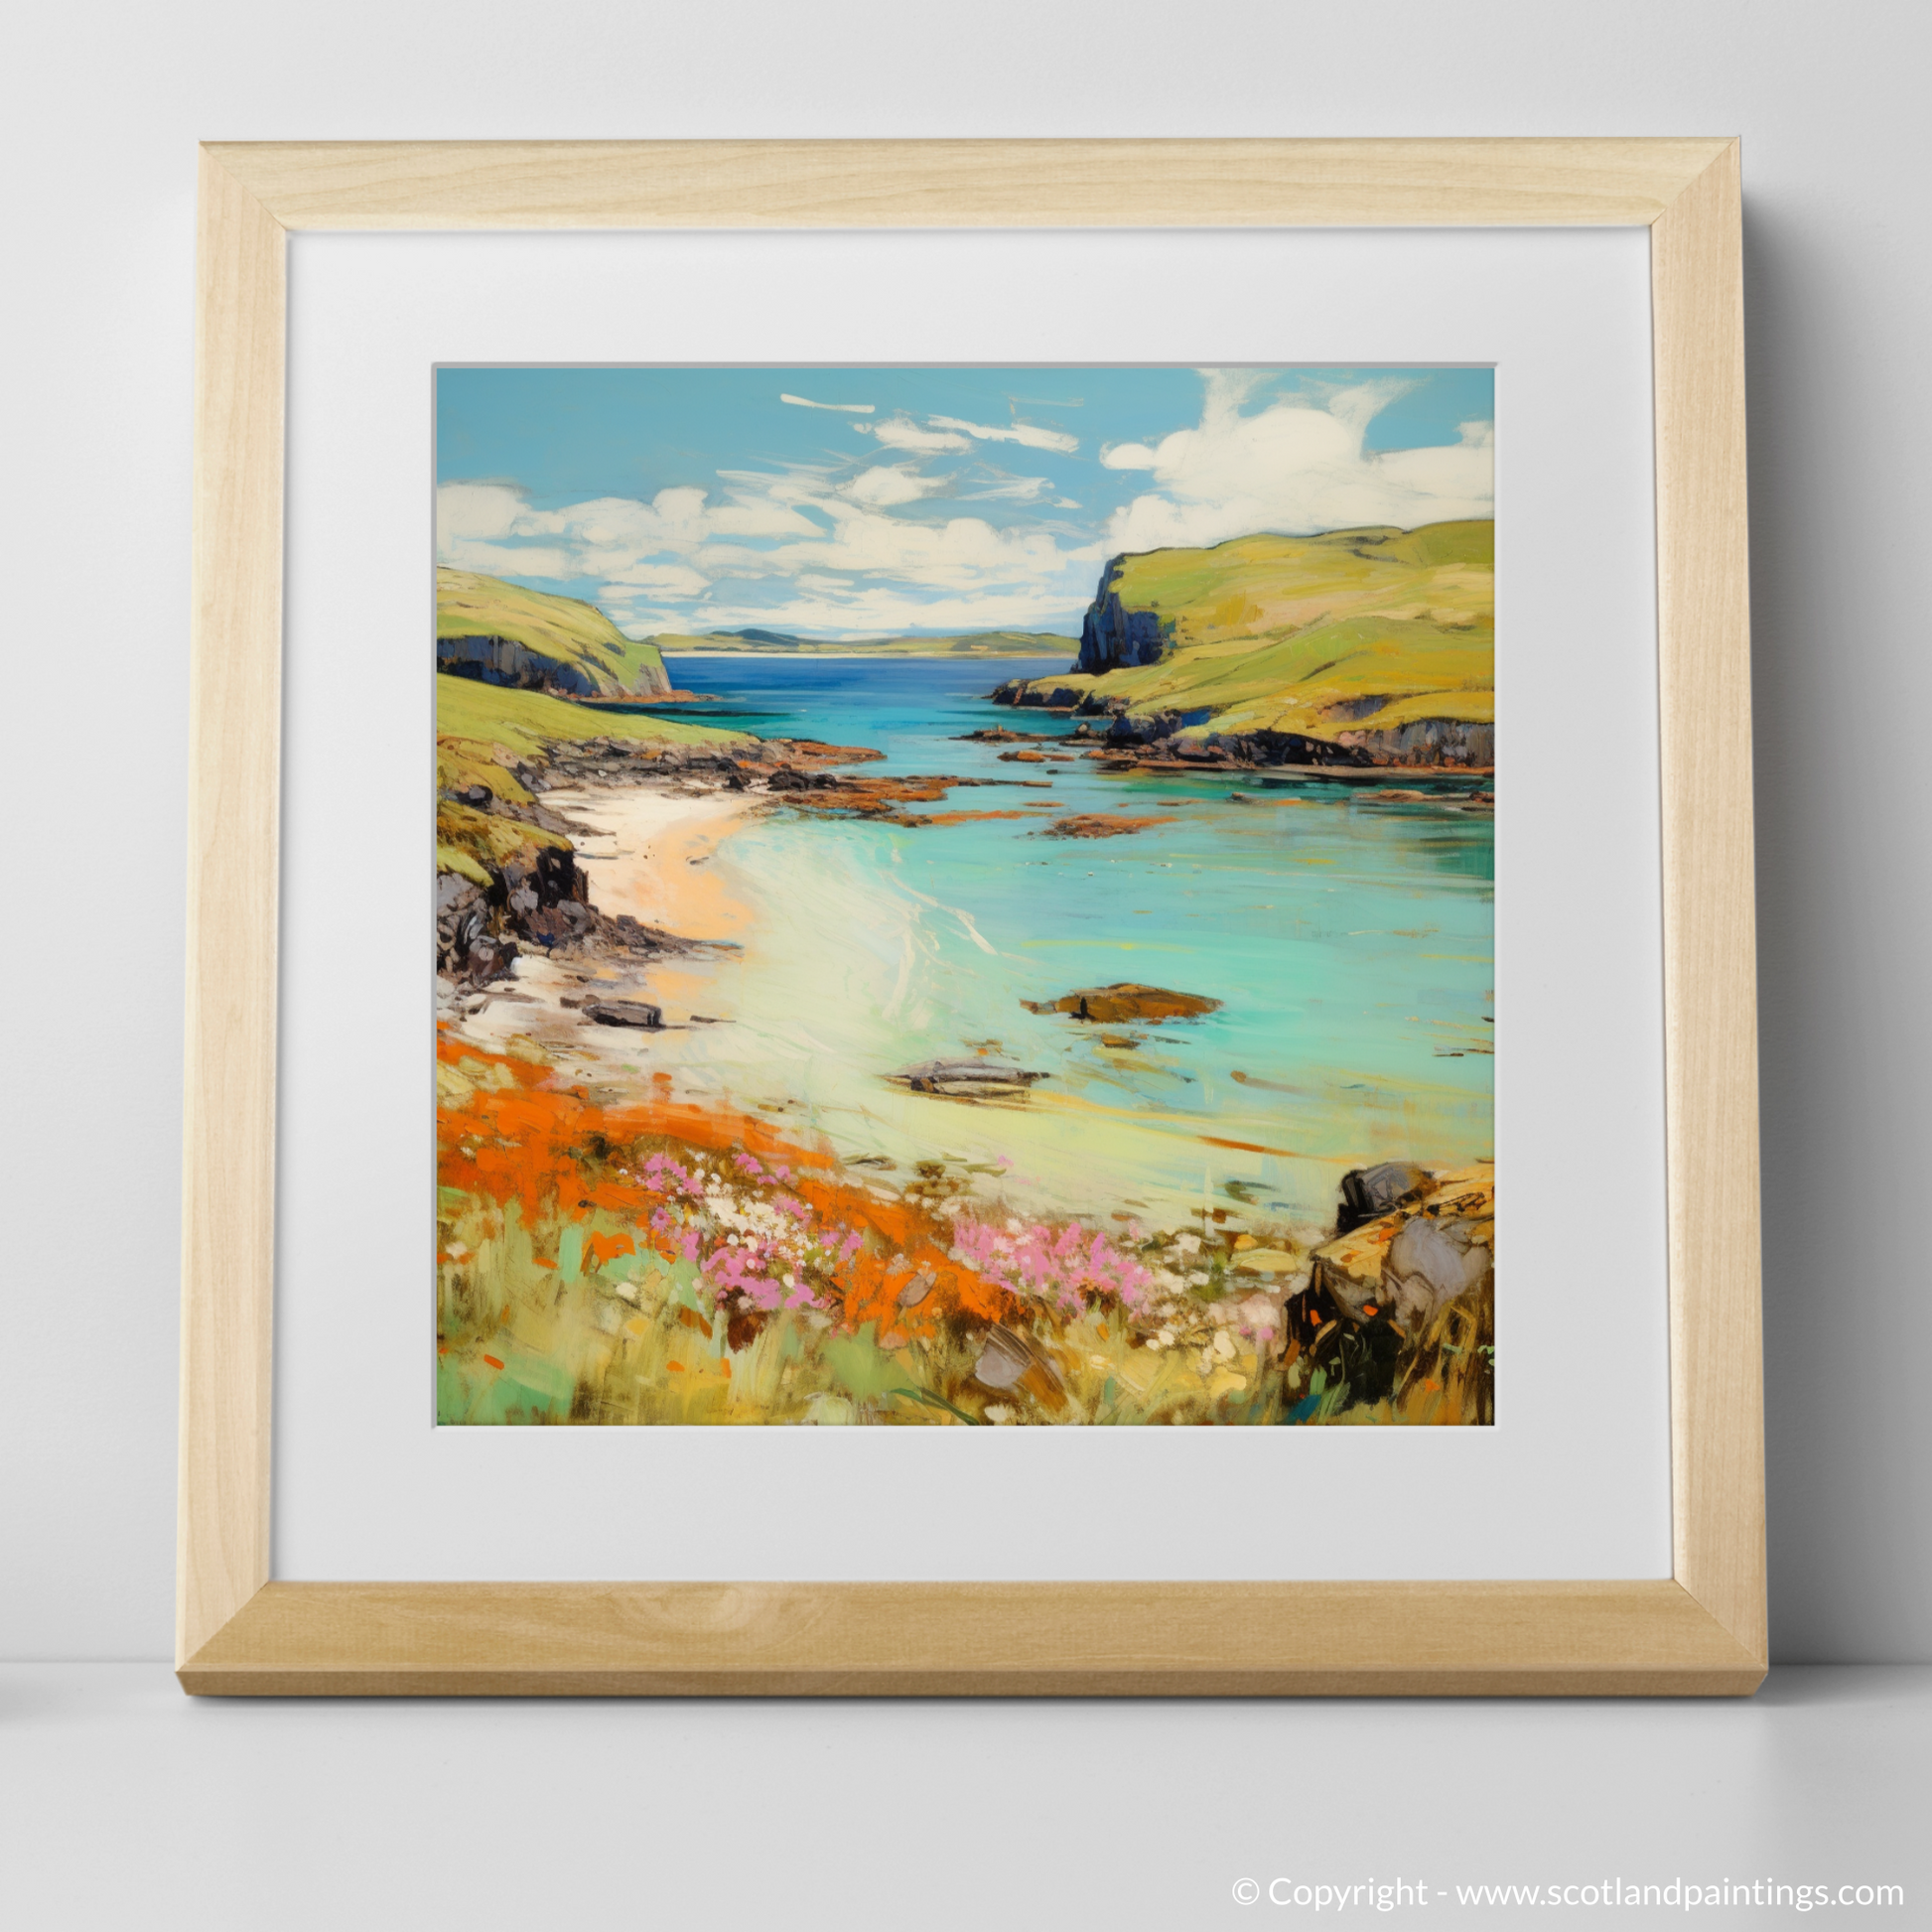 Art Print of Calgary Bay, Isle of Mull in summer with a natural frame